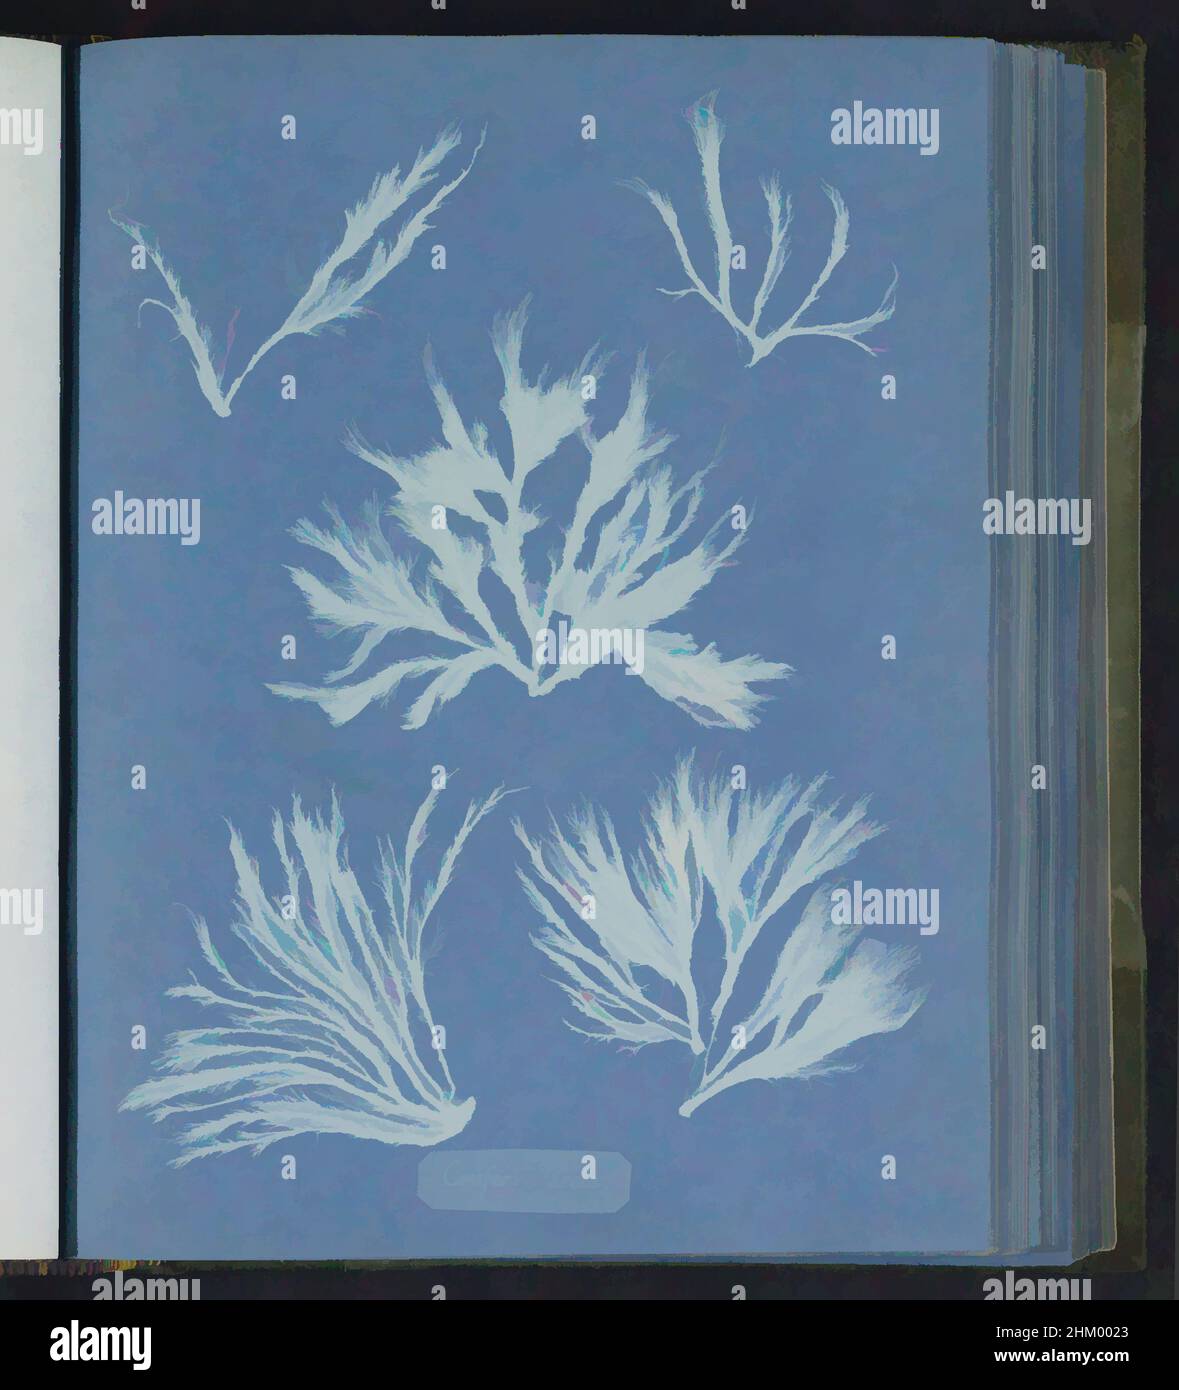 Art inspired by Conferva arcta, Anna Atkins, United Kingdom, c. 1843 - c. 1853, photographic support, cyanotype, height 250 mm × width 200 mm, Classic works modernized by Artotop with a splash of modernity. Shapes, color and value, eye-catching visual impact on art. Emotions through freedom of artworks in a contemporary way. A timeless message pursuing a wildly creative new direction. Artists turning to the digital medium and creating the Artotop NFT Stock Photo